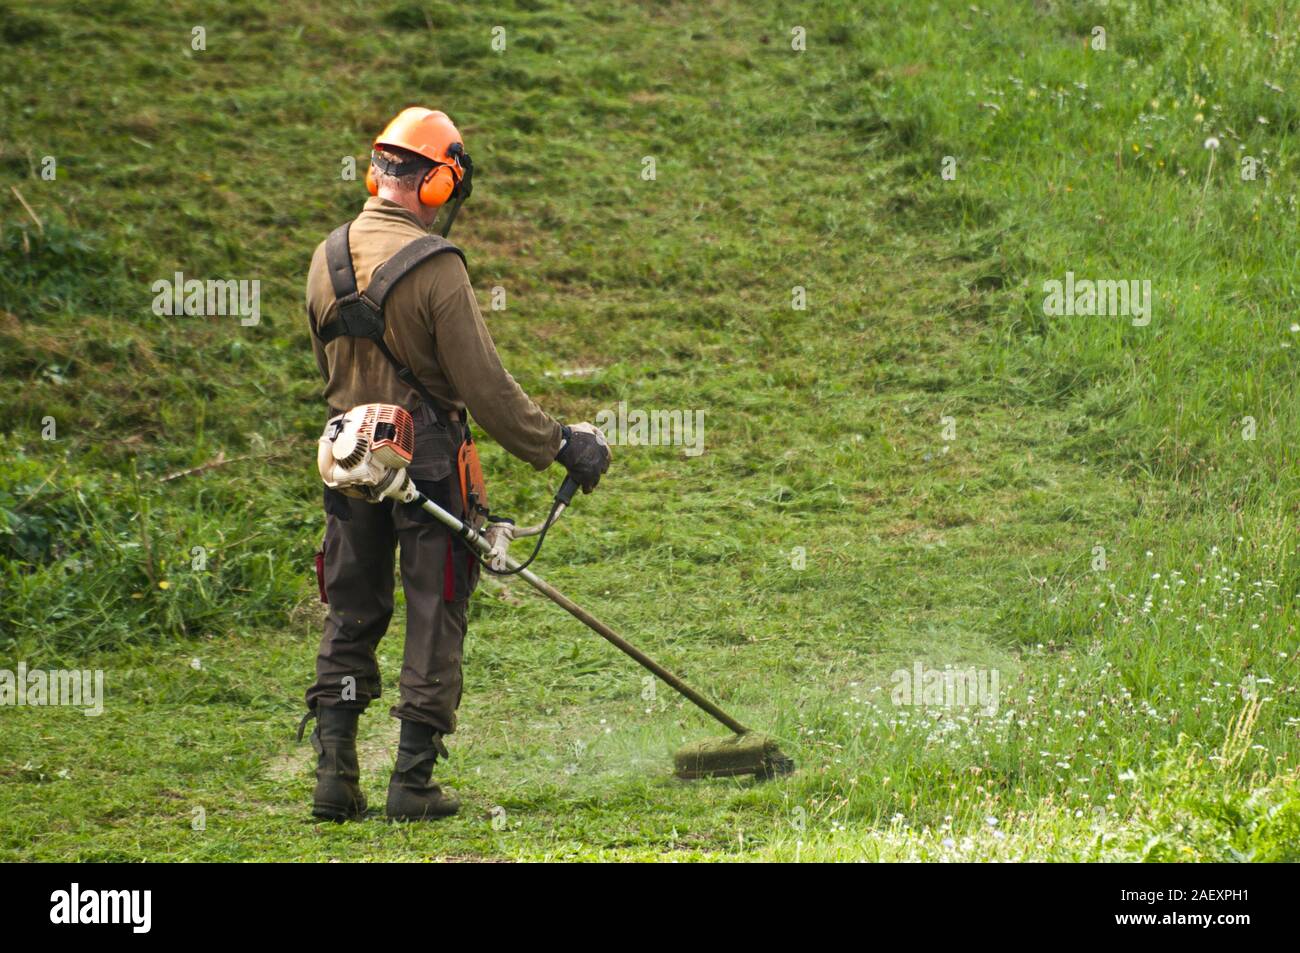 worker trimming grass using an hand-held mechanical trimmer Stock Photo